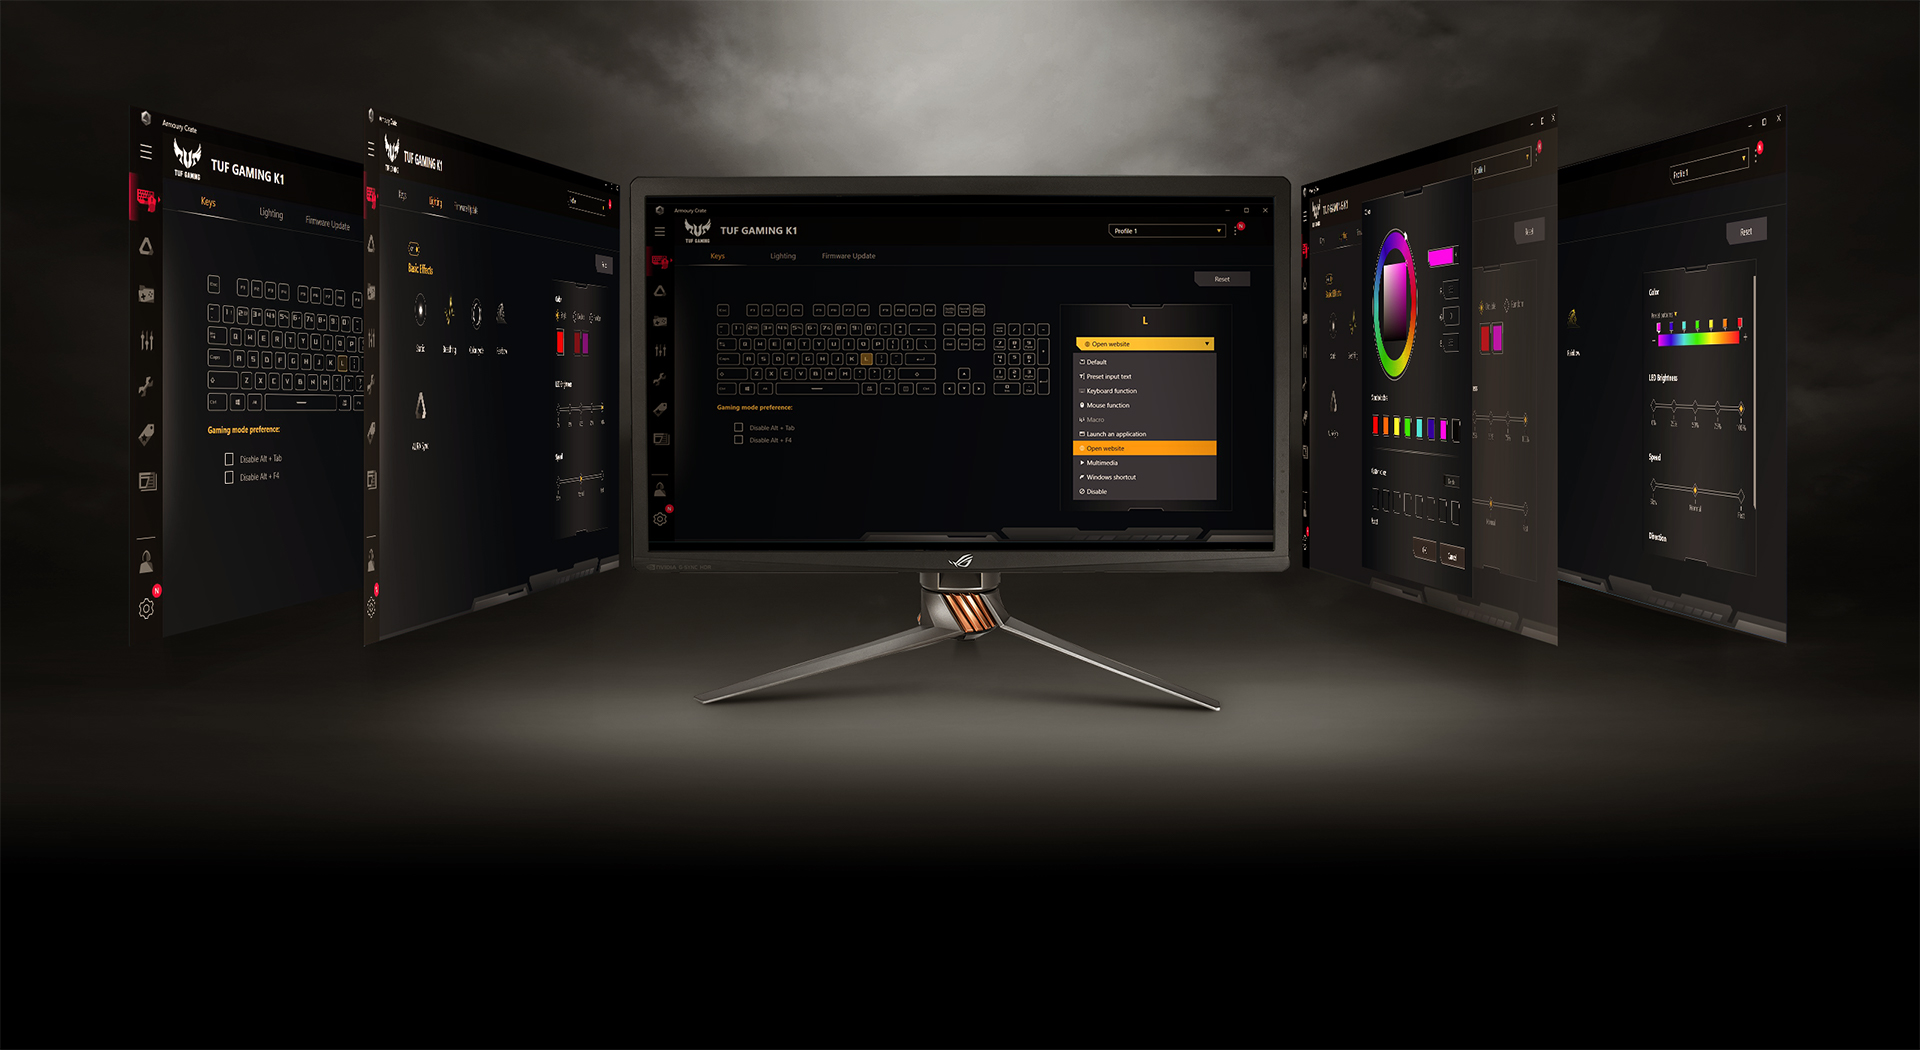 ASUS TUF Gaming K1 works with Armoury Crate software